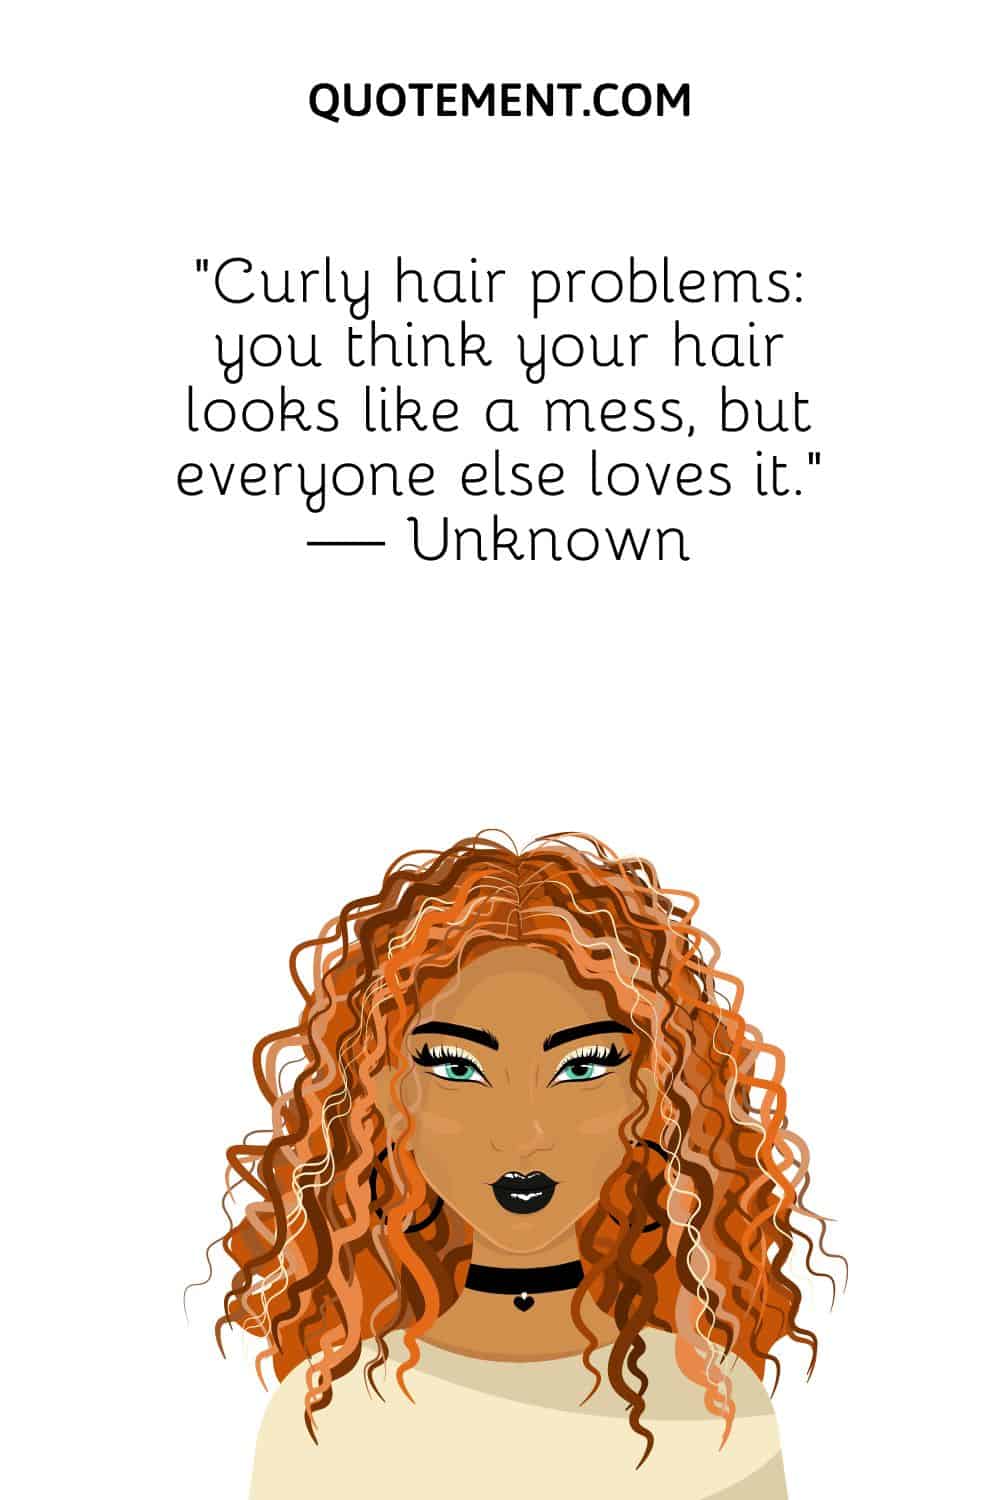 Curly hair problems you think your hair looks like a mess, but everyone else loves it